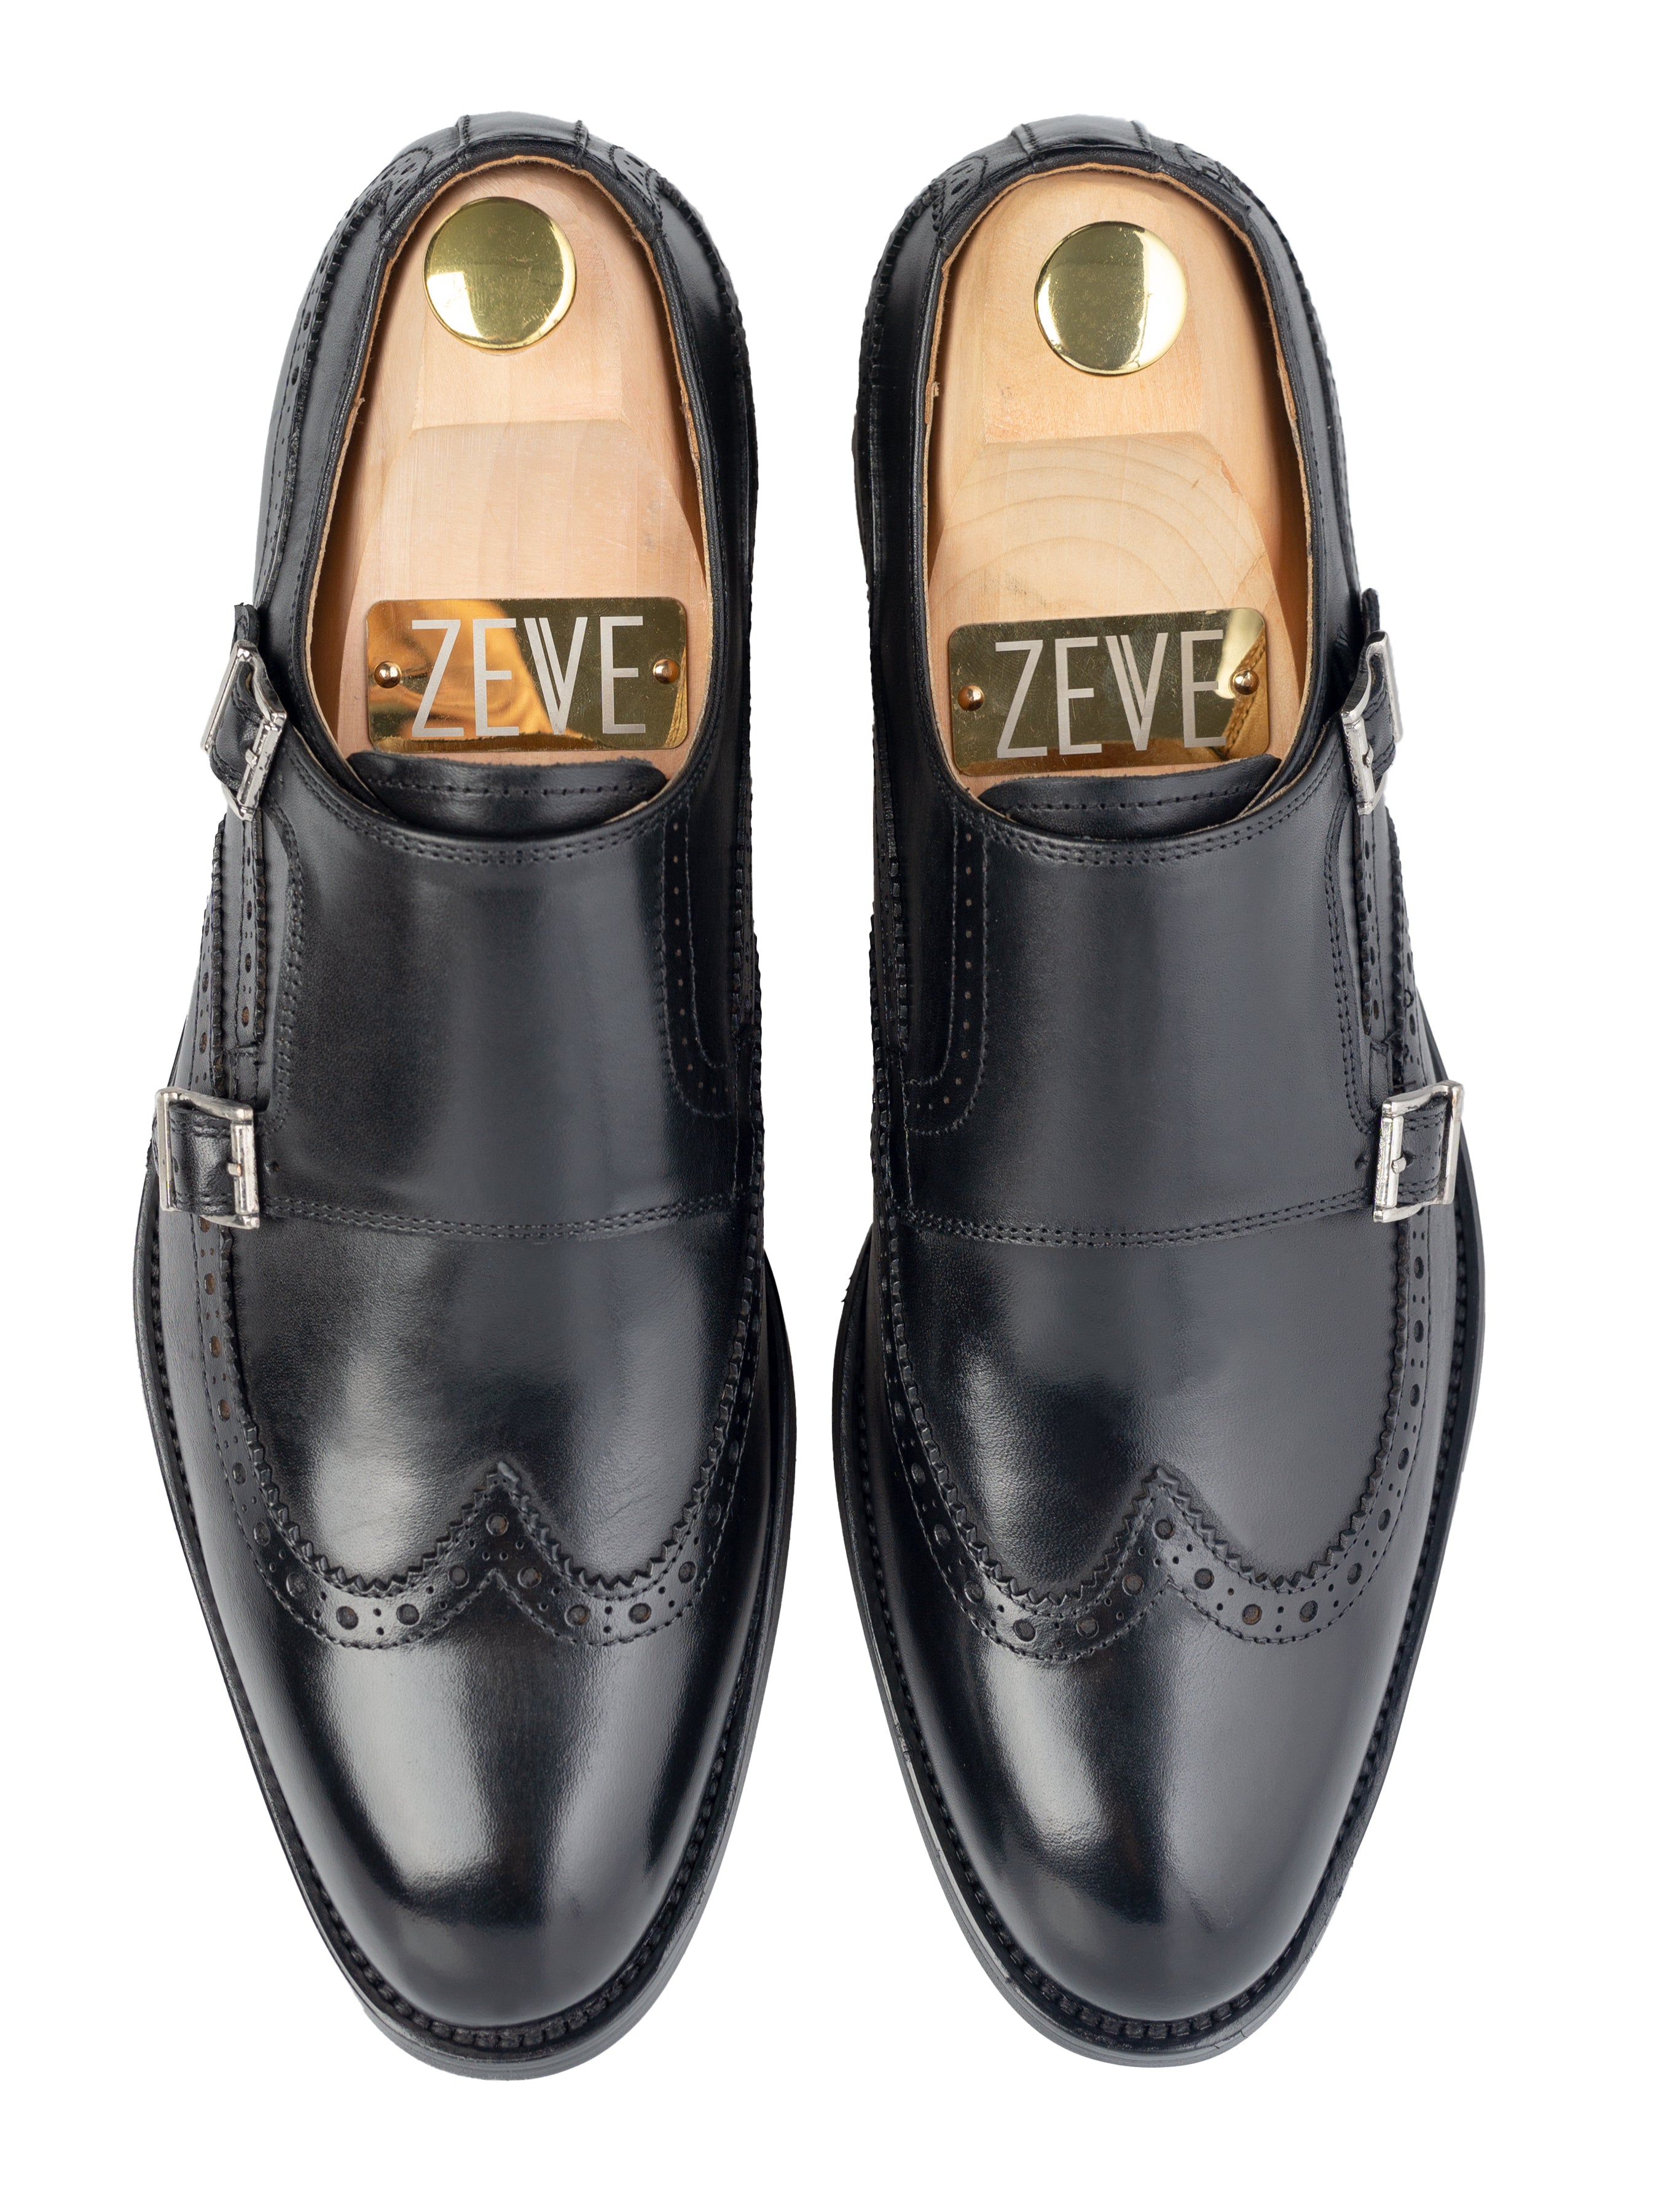 Double Monk Strap Brogue Wingtip - Solid Black (Hand Painted Patina)